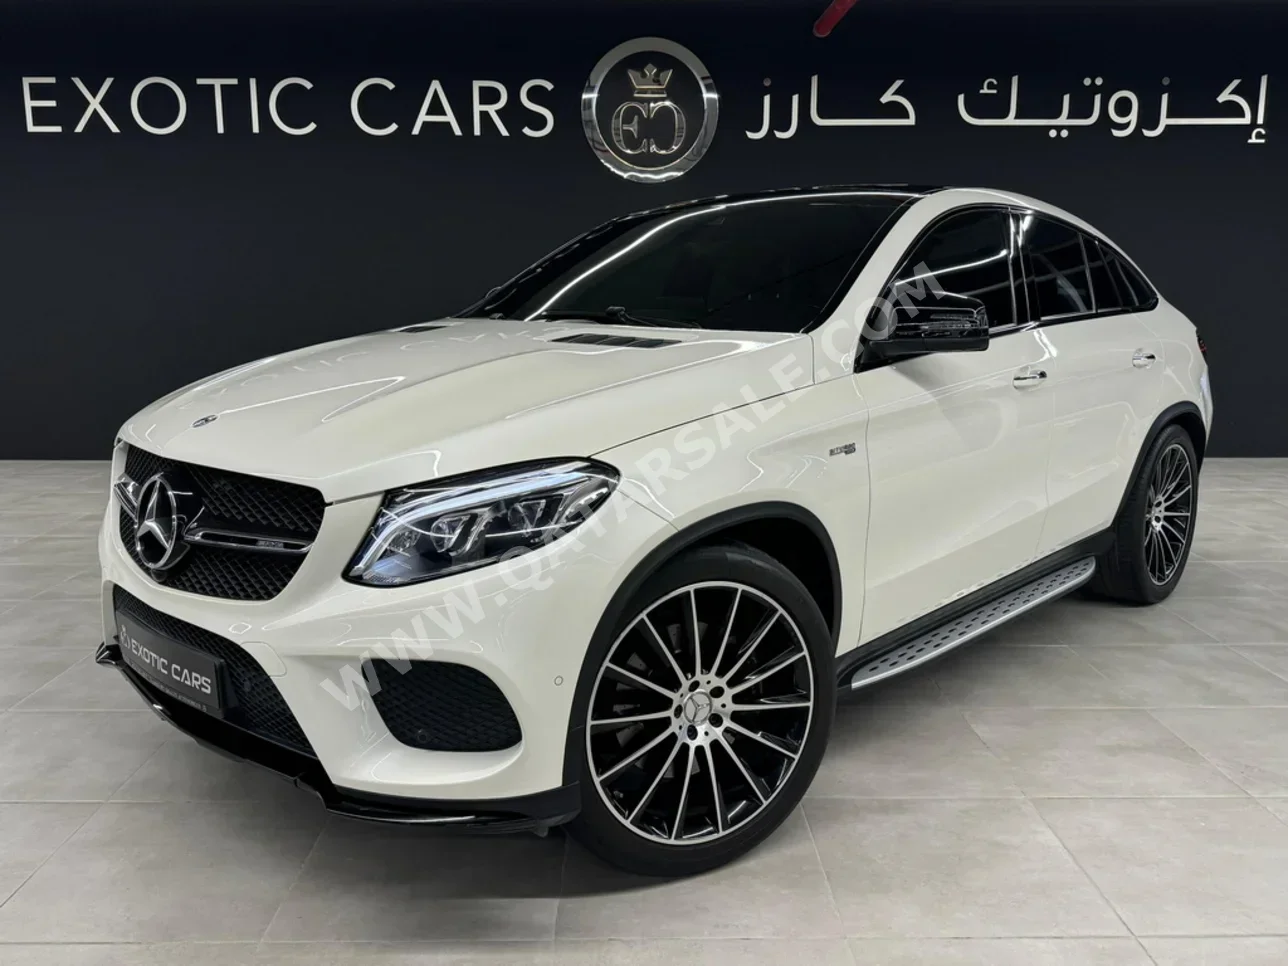 Mercedes-Benz  GLE  43 AMG  2018  Automatic  55,000 Km  6 Cylinder  Four Wheel Drive (4WD)  SUV  White